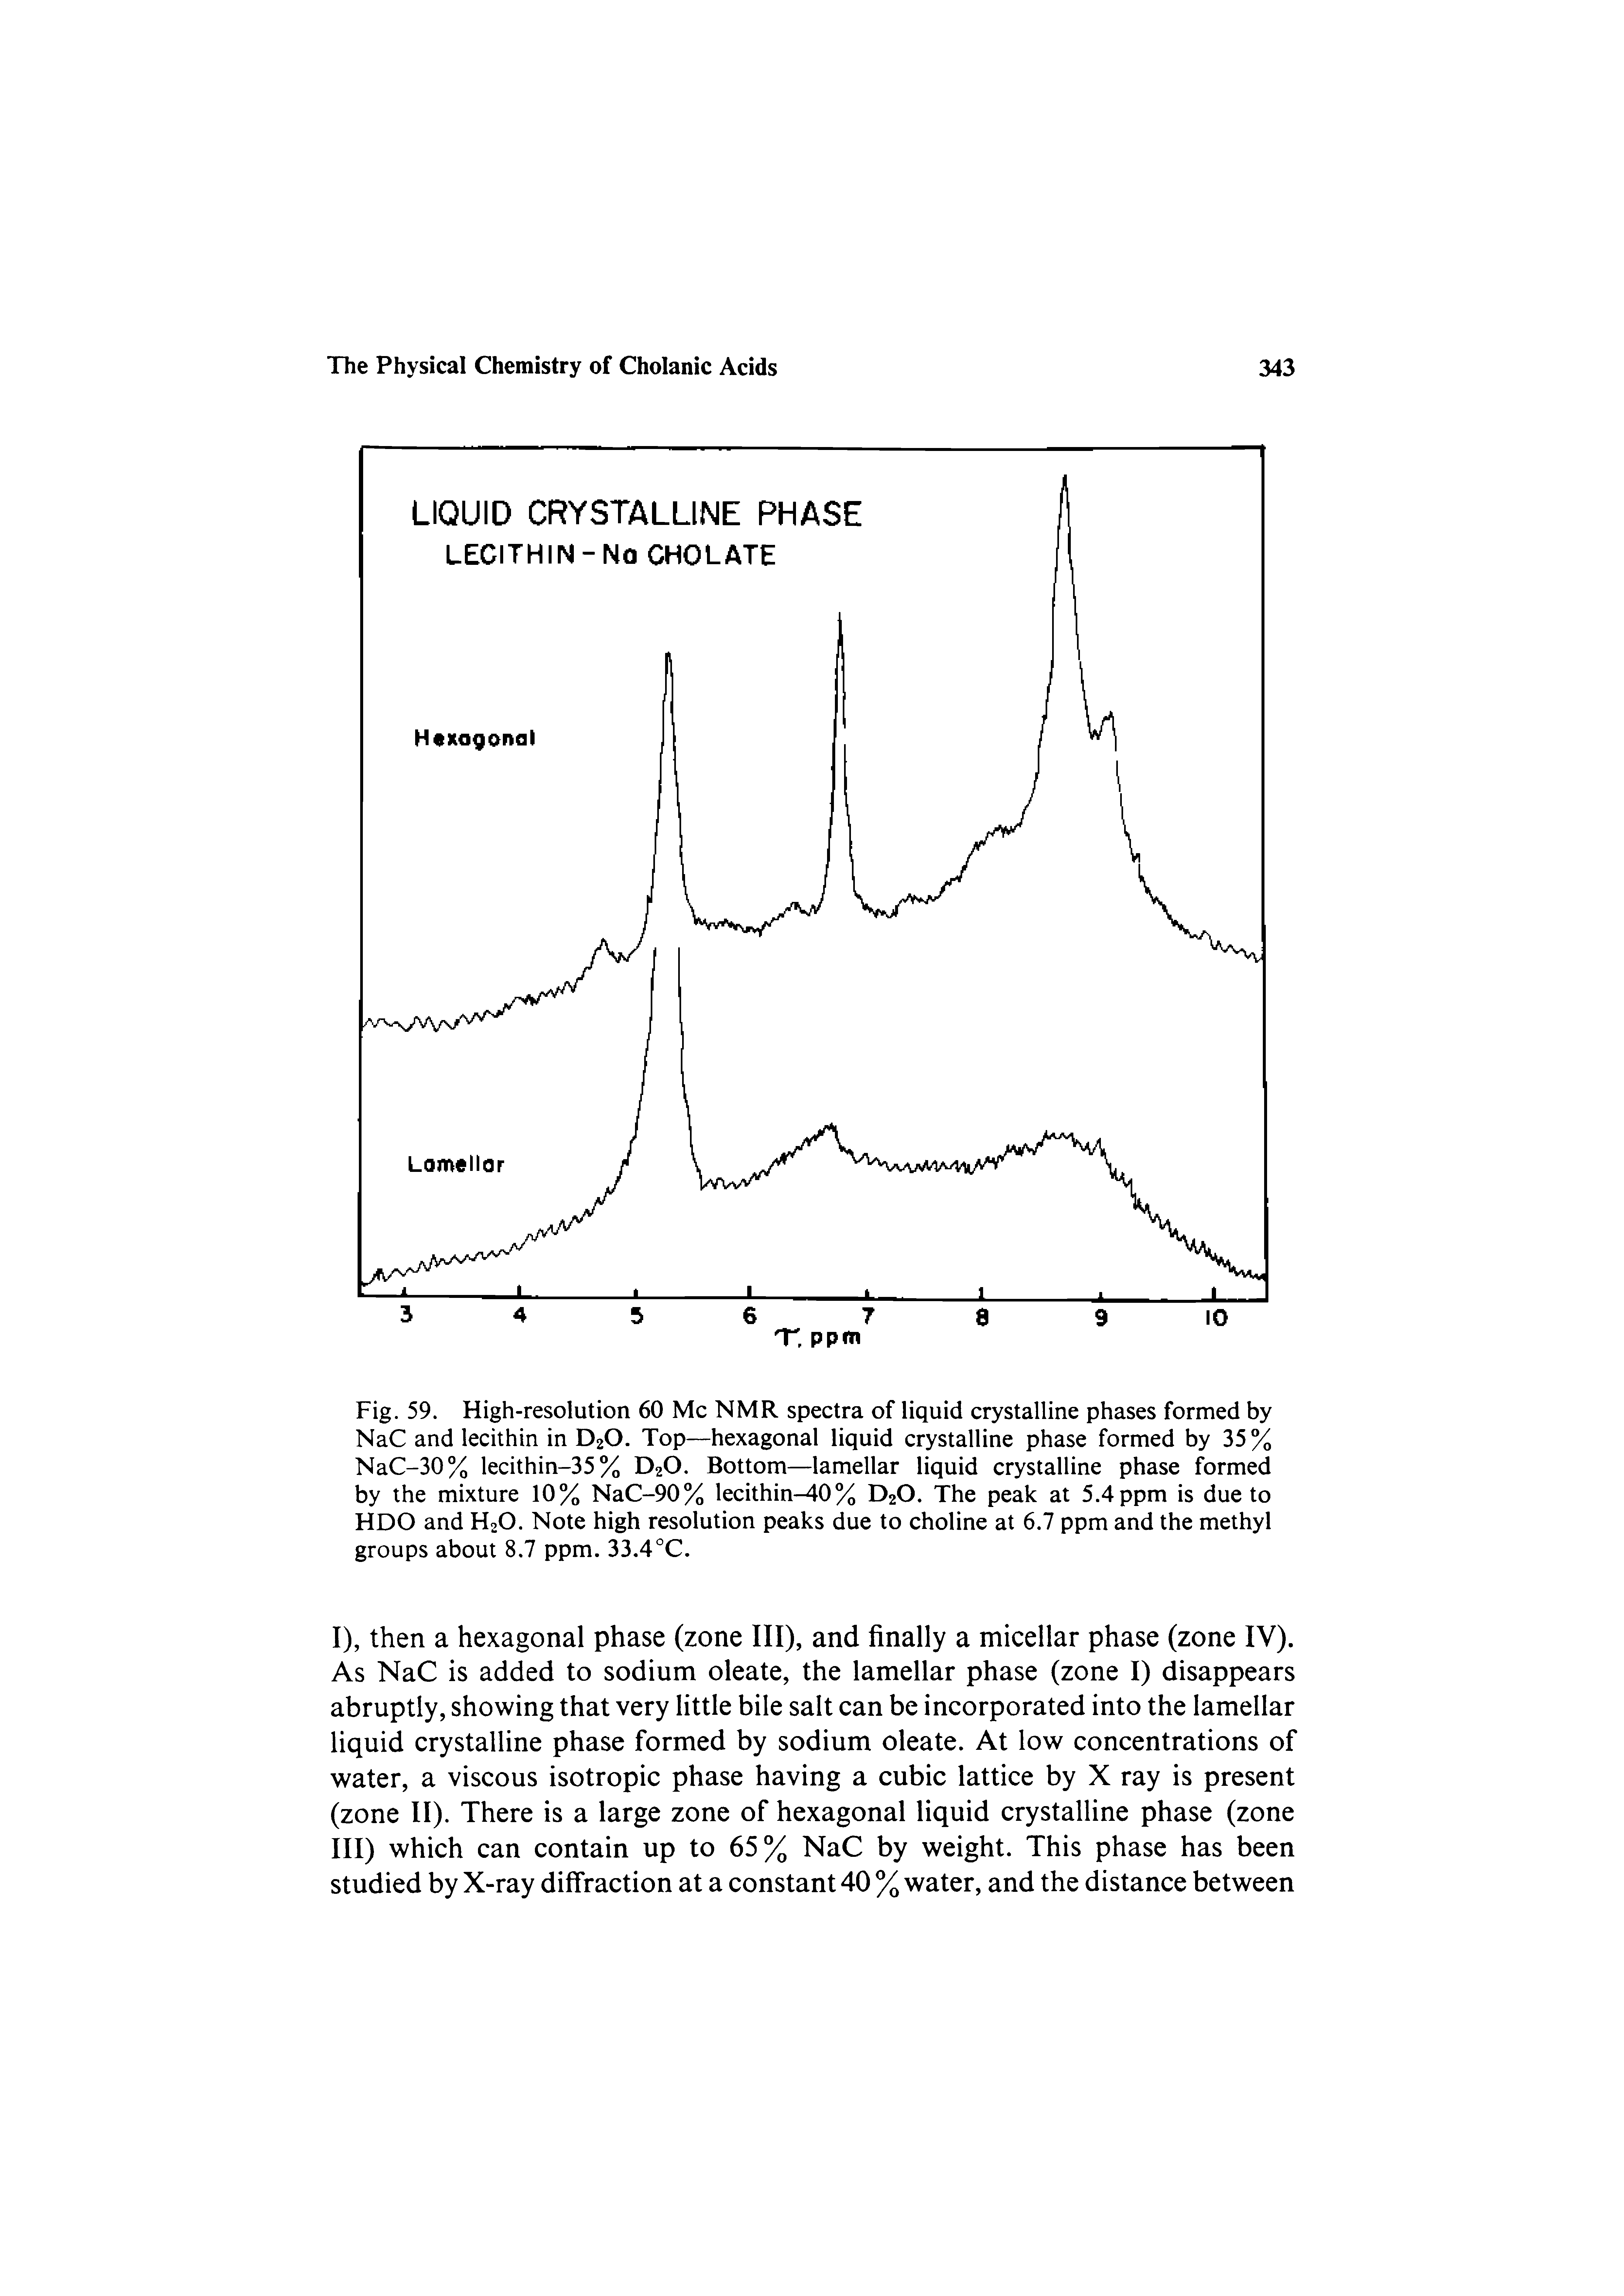 Fig. 59. High-resolution 60 Me NMR spectra of liquid crystalline phases formed by NaC and lecithin in D2O. Top—hexagonal liquid crystalline phase formed by 35% NaC-30% lecithin-35 % D2O. Bottom—lamellar liquid crystalline phase formed by the mixture 10% NaC-90% lecithin-40 % D2O. The peak at 5.4 ppm is due to HDO and H2O. Note high resolution peaks due to choline at 6.7 ppm and the methyl groups about 8.7 ppm. 33.4X.